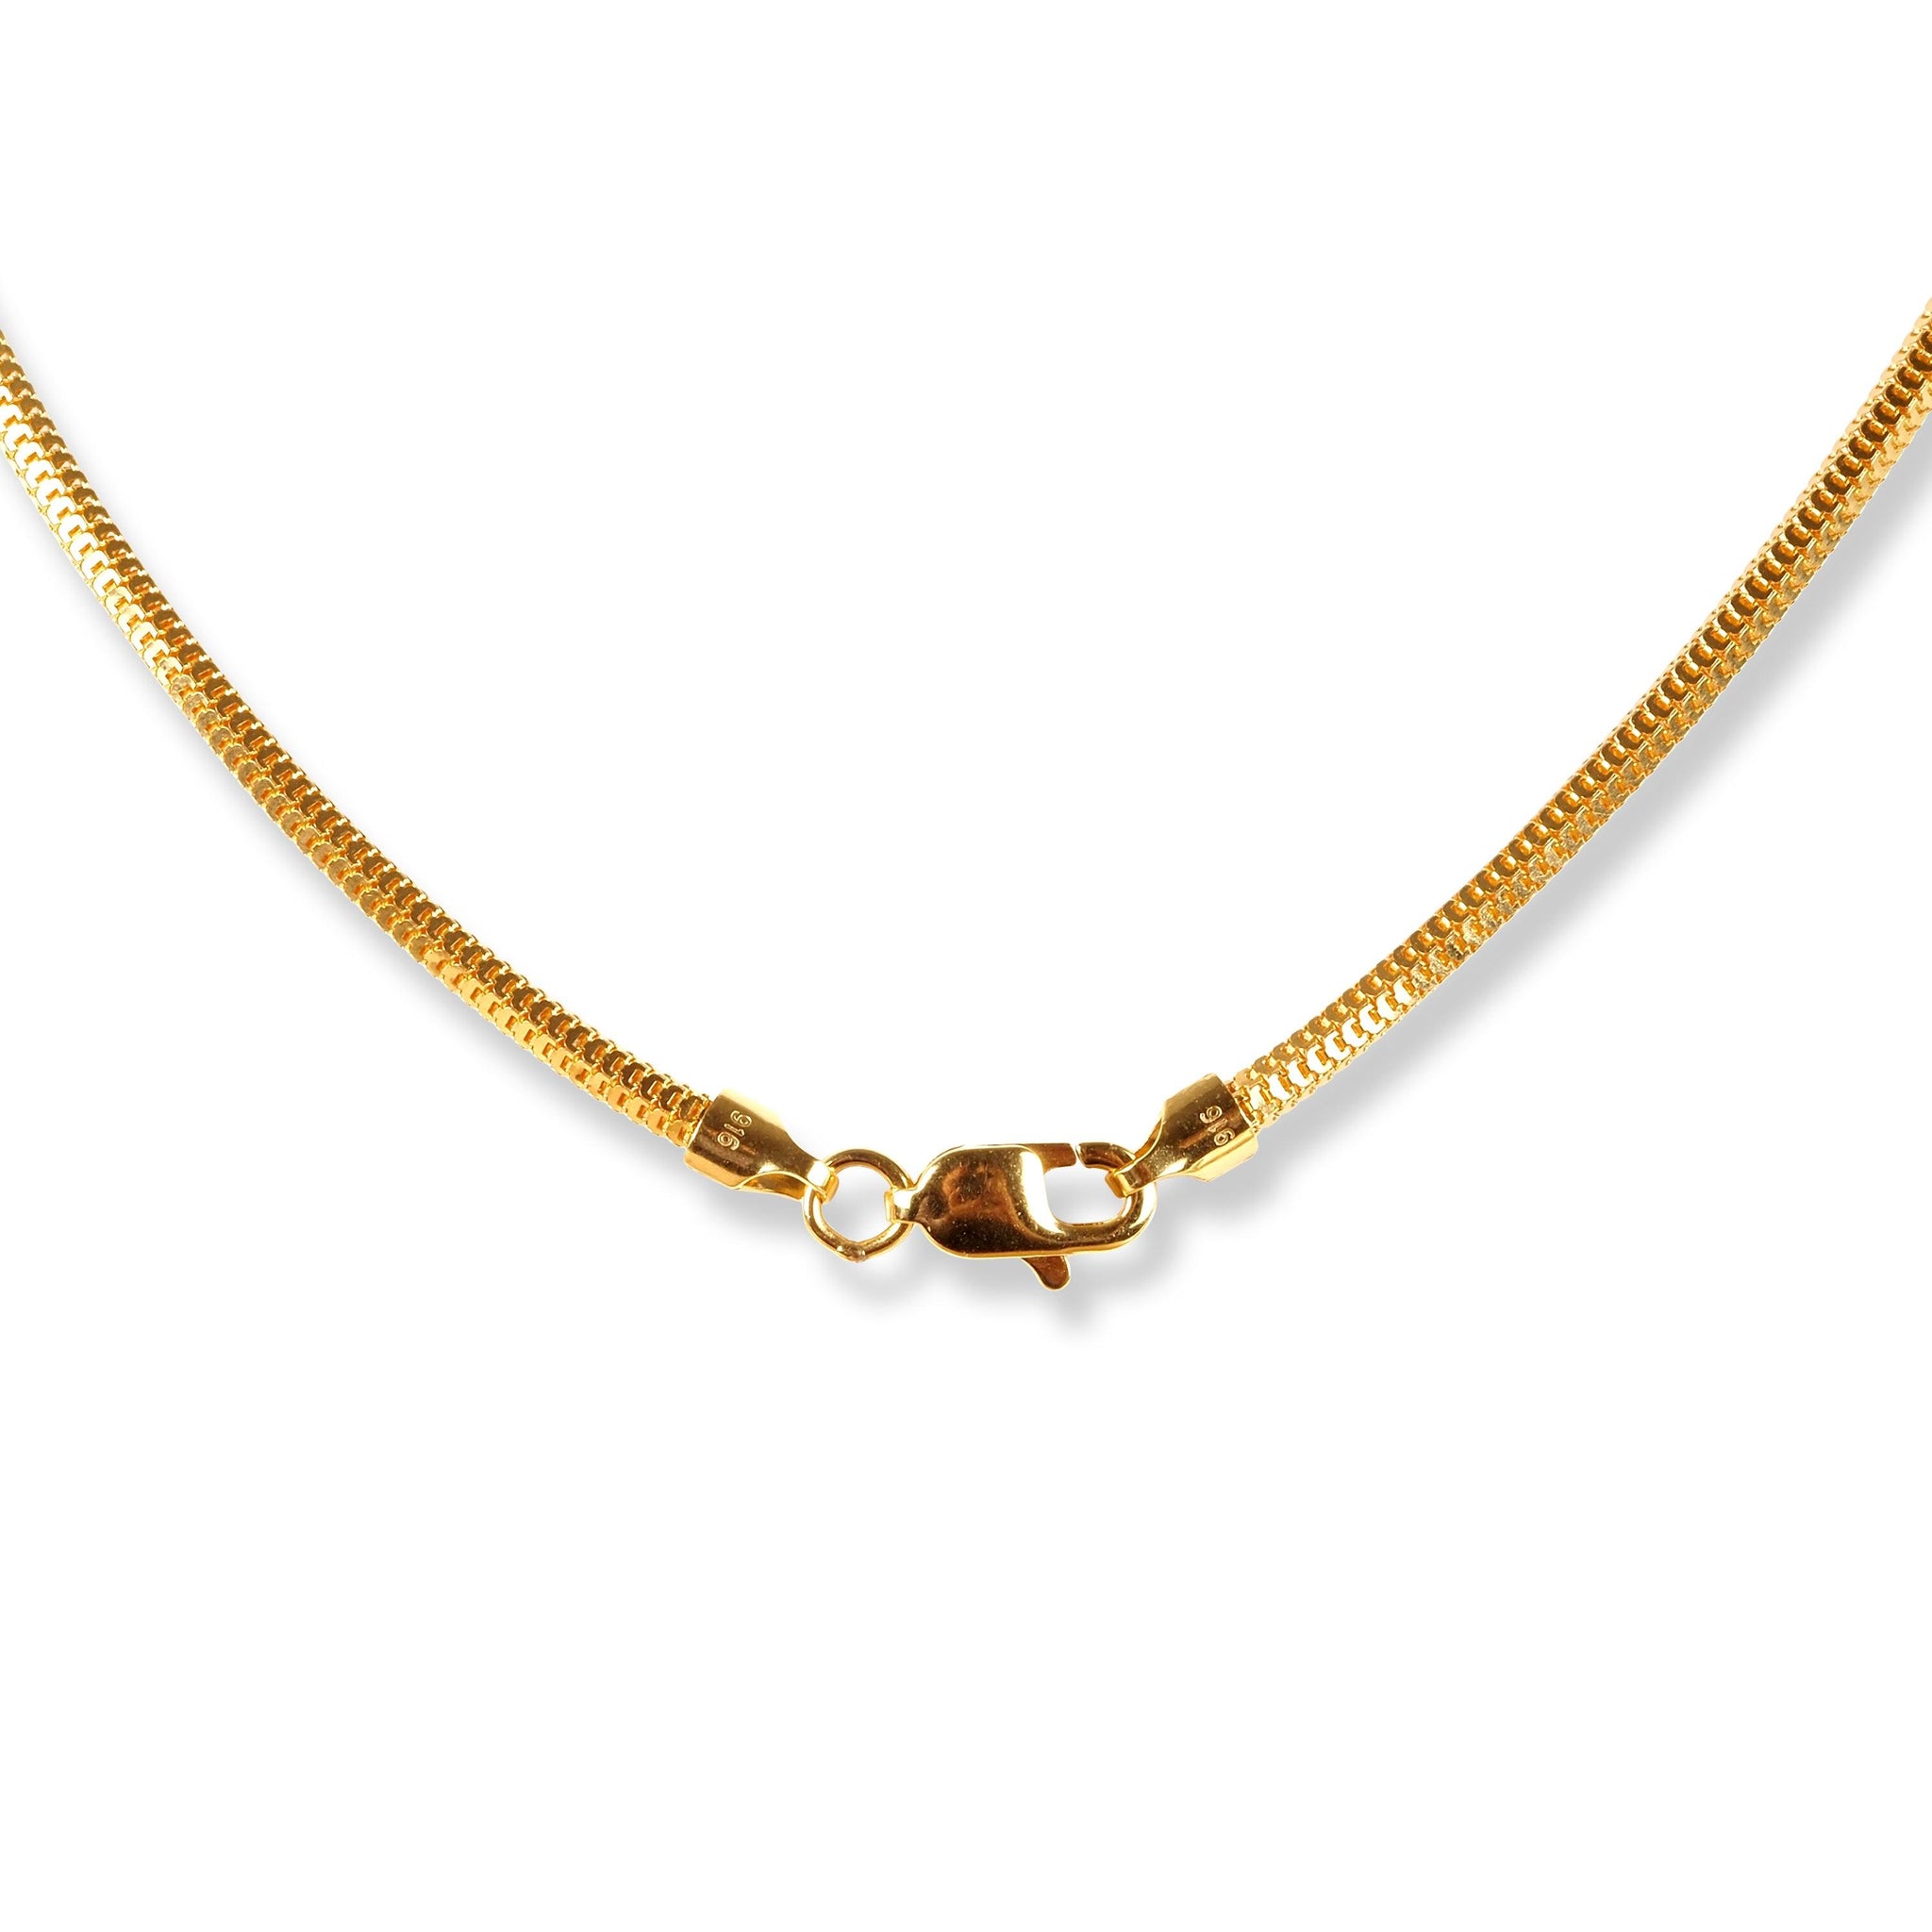 22ct Yellow Gold Round Snake Chain with Lobster Clasp C-1217